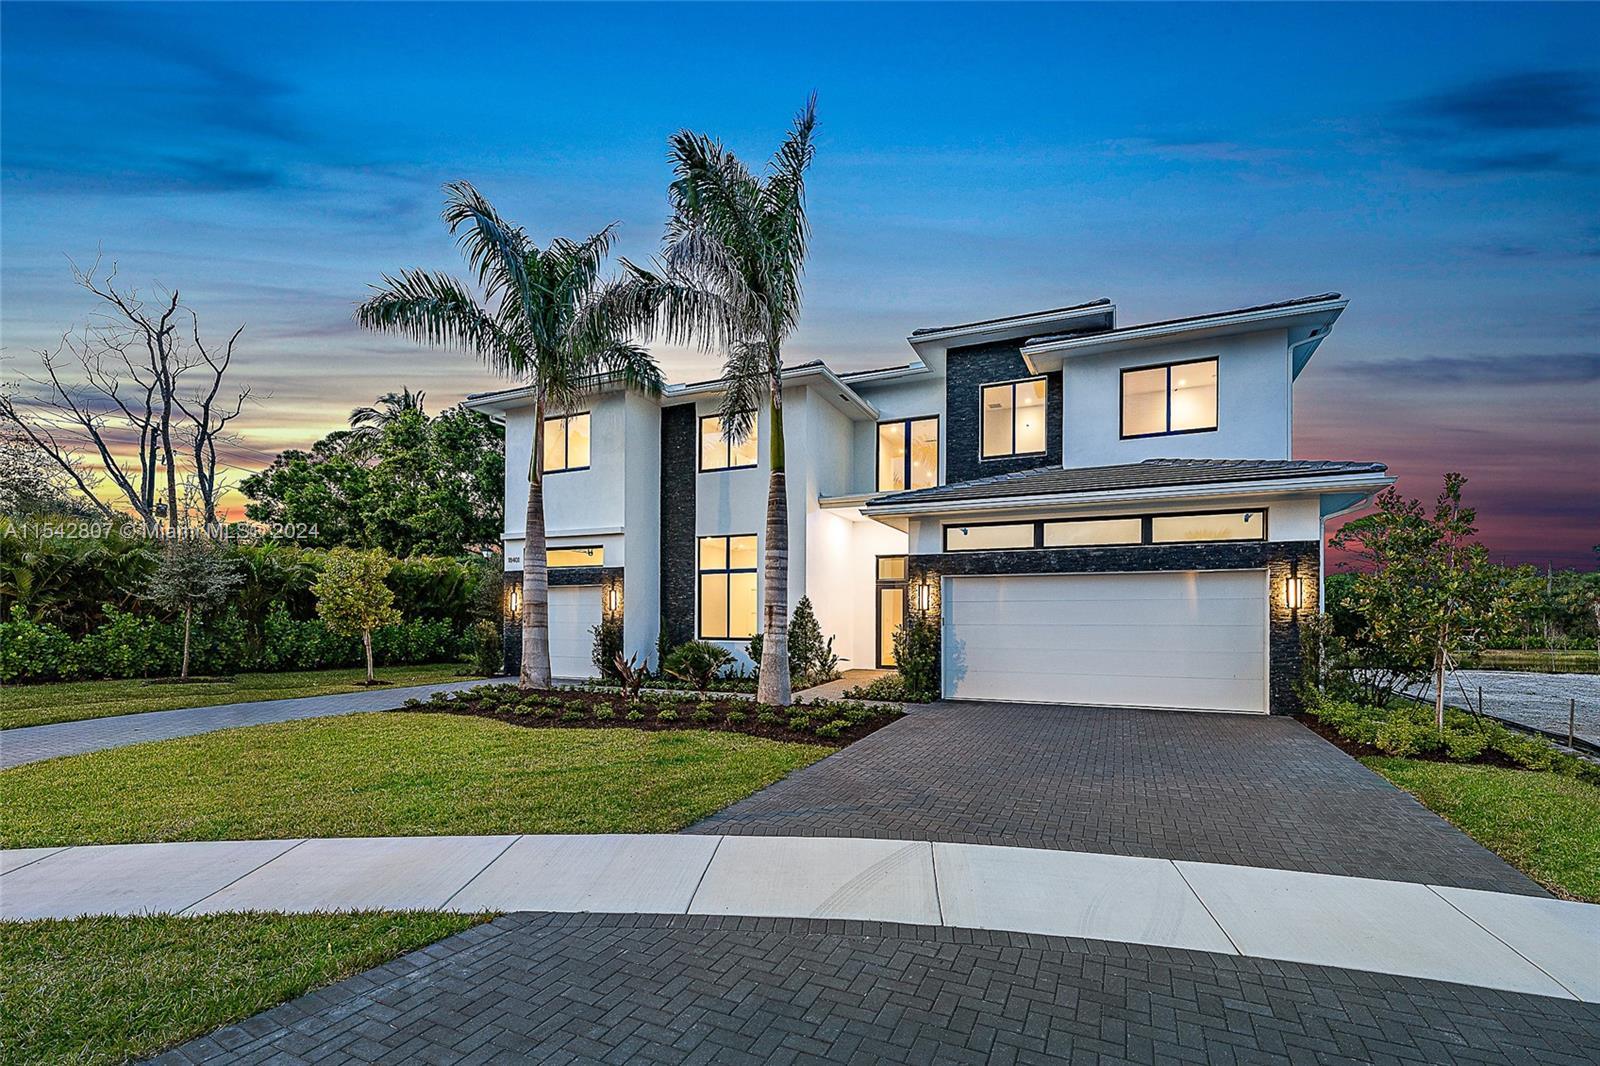 Located in Jupiter, FL's new ''Symphony'' community, this elegant home showcases the ''Tahoe'' desig